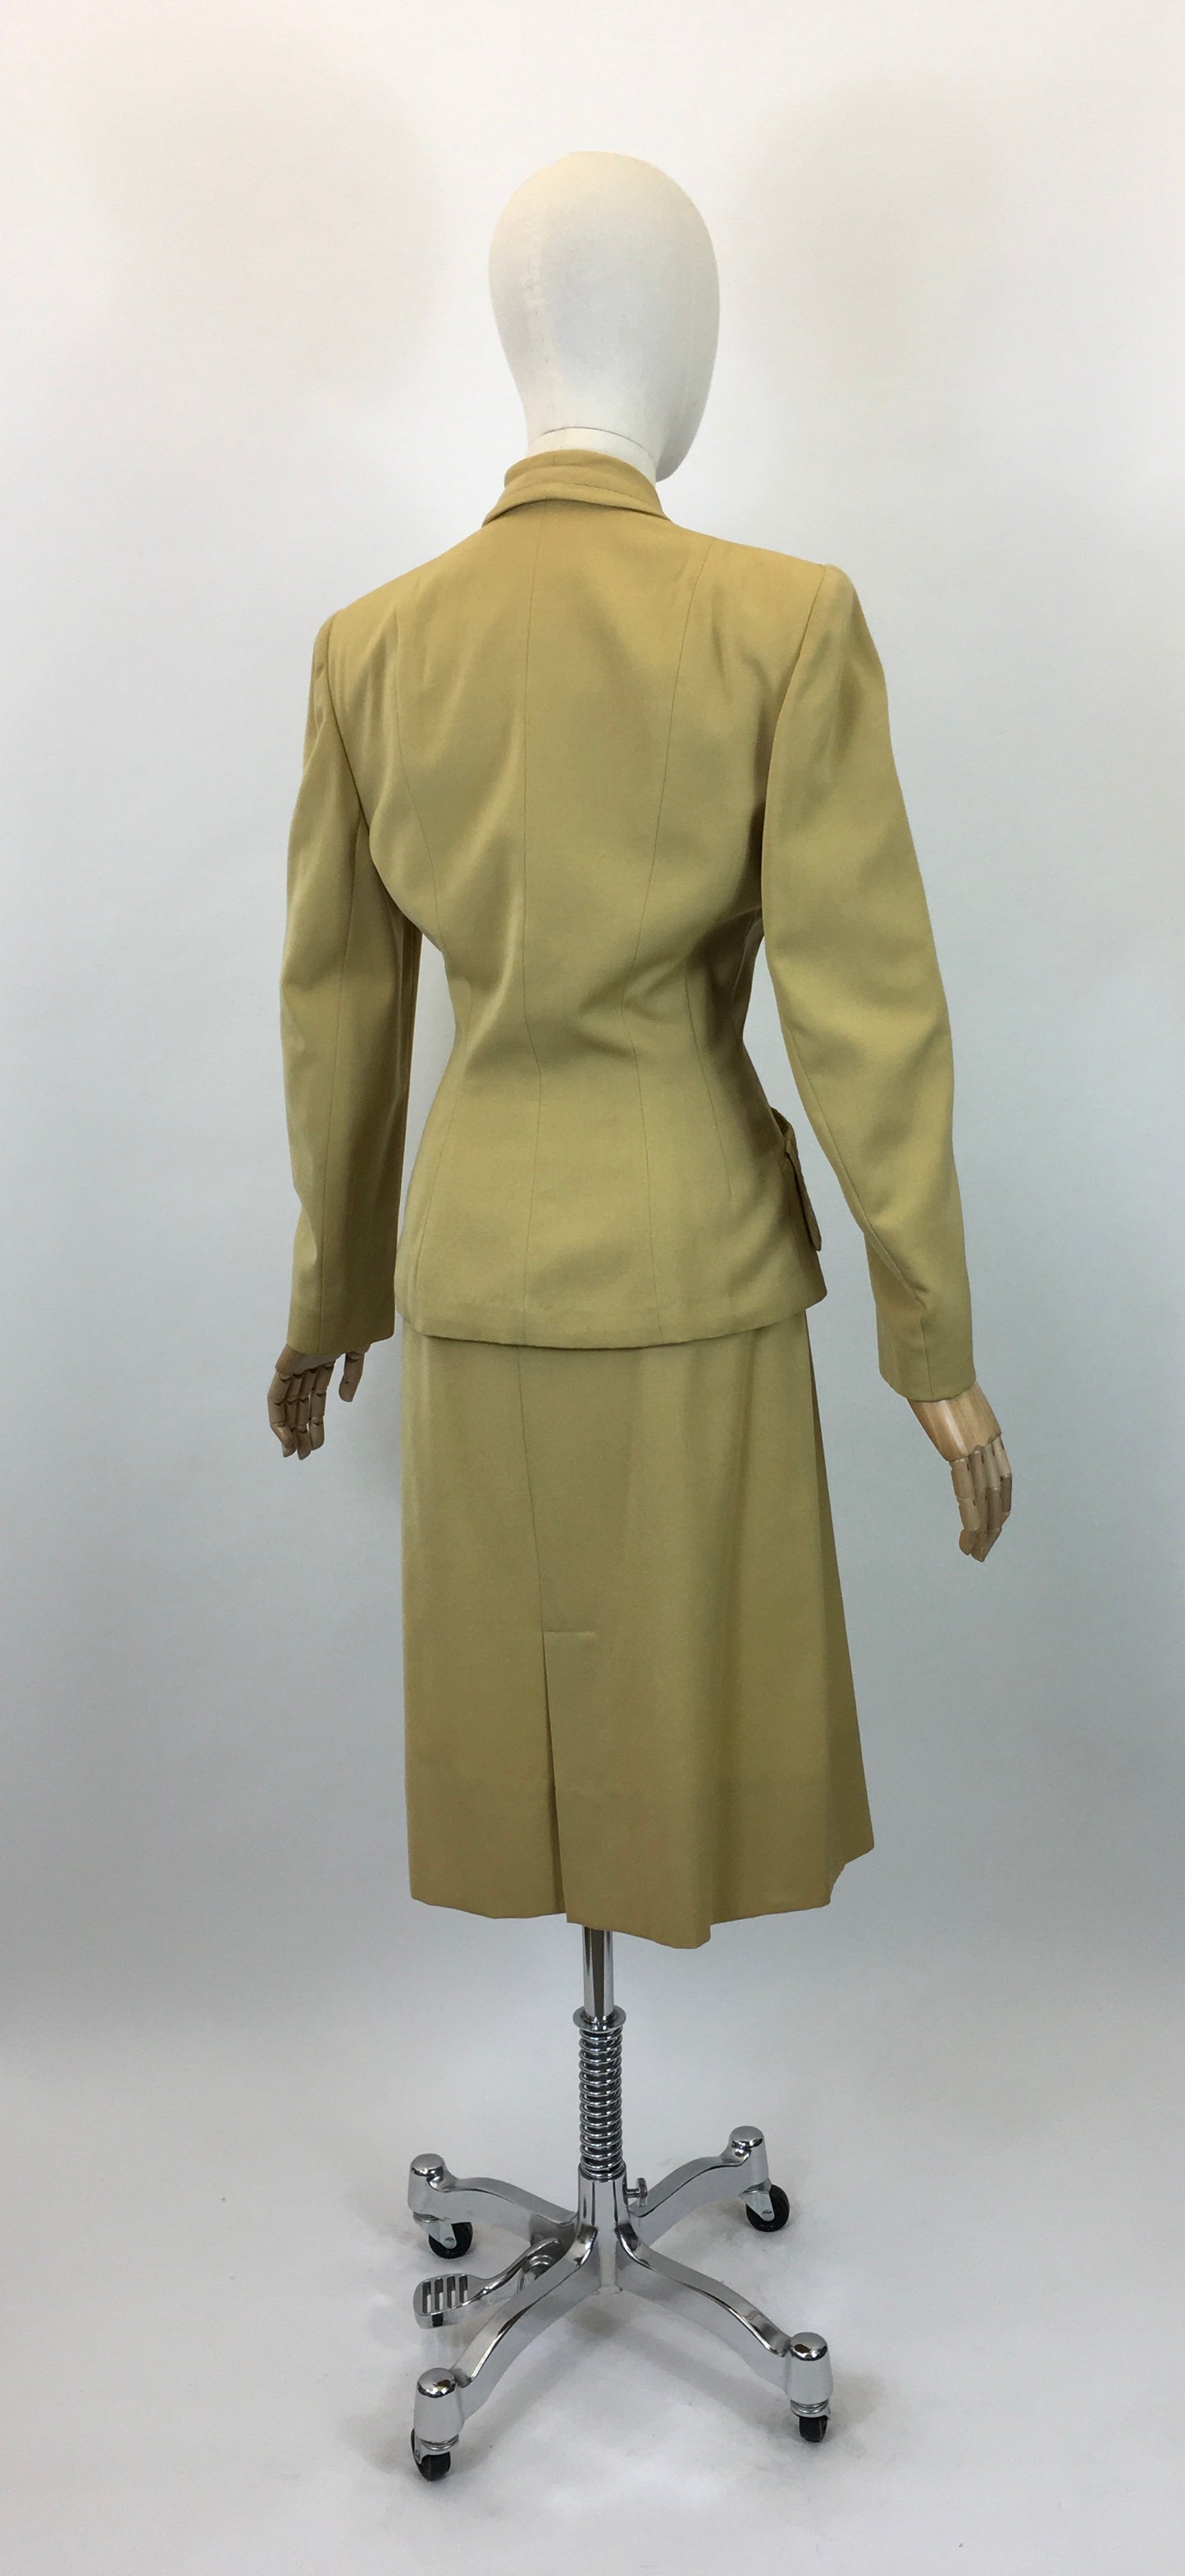 Original 1940's Stunning American 2Pc Suit - In A Light Mustard With Exquisite Details